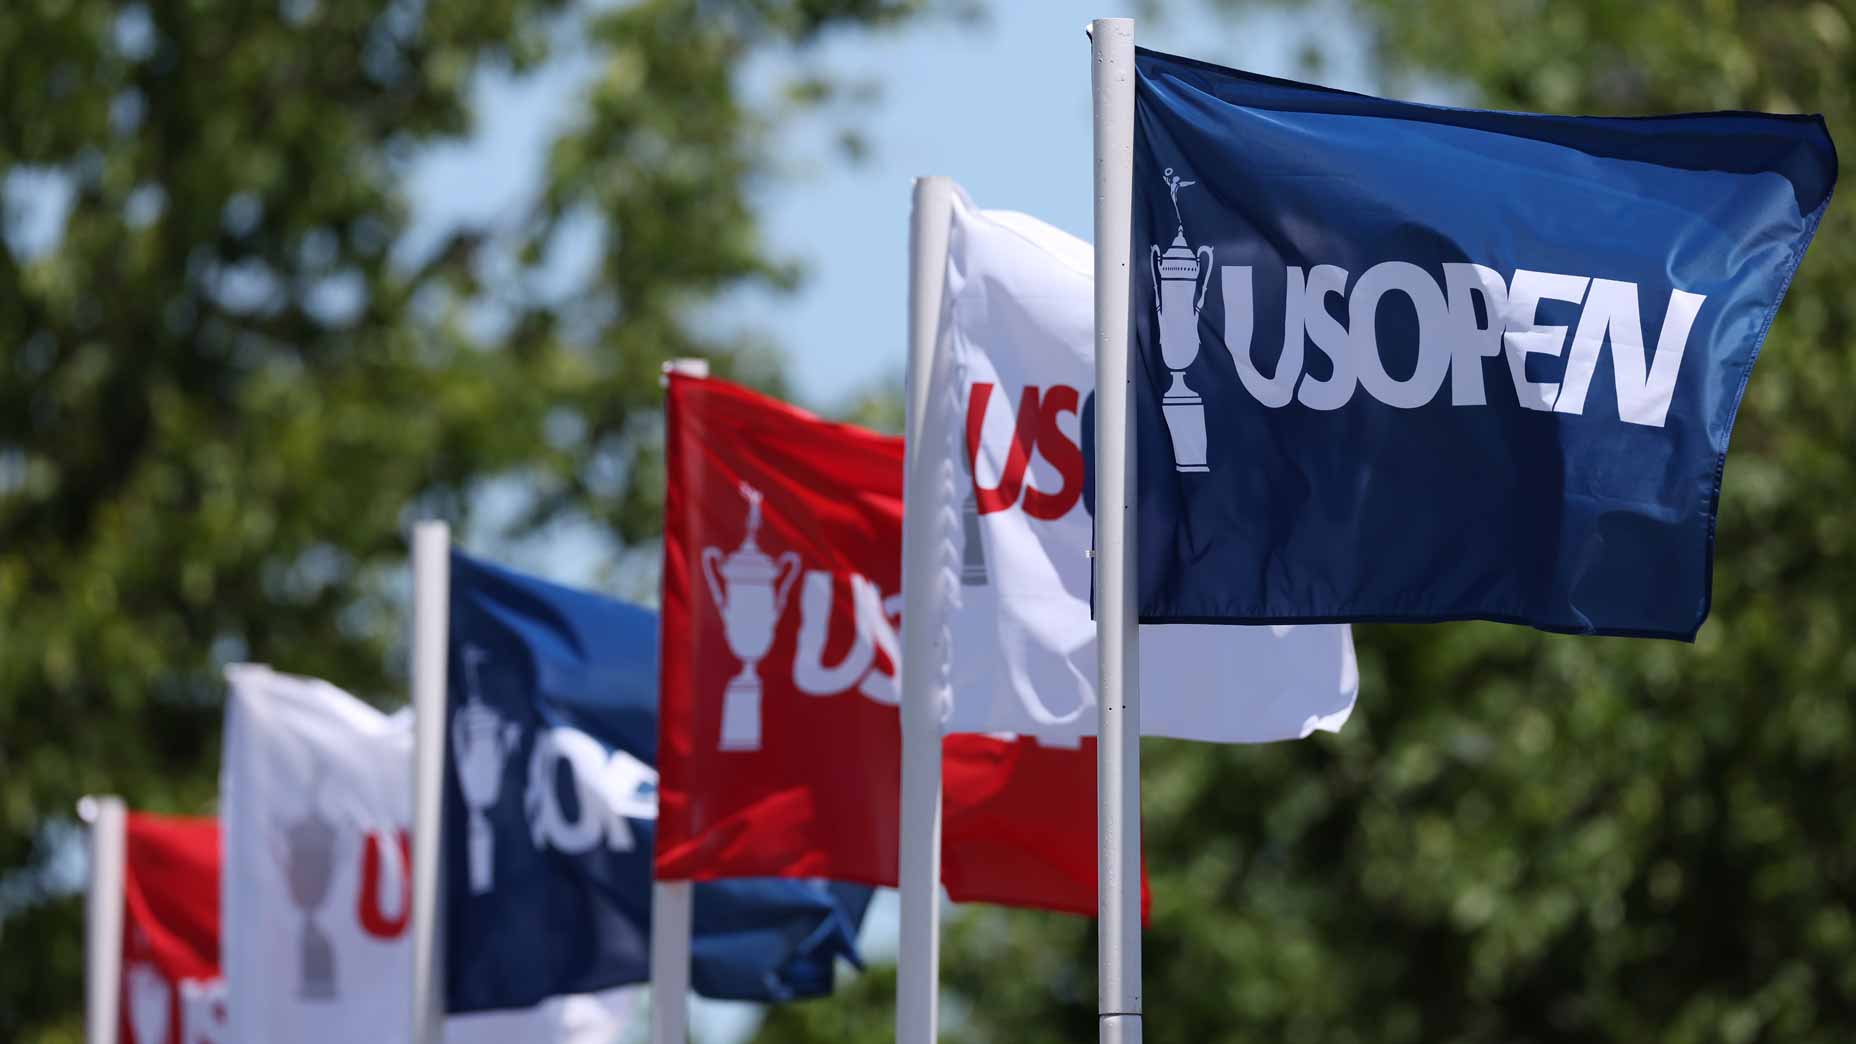 US Open flags seen during practice at 2022 US Open